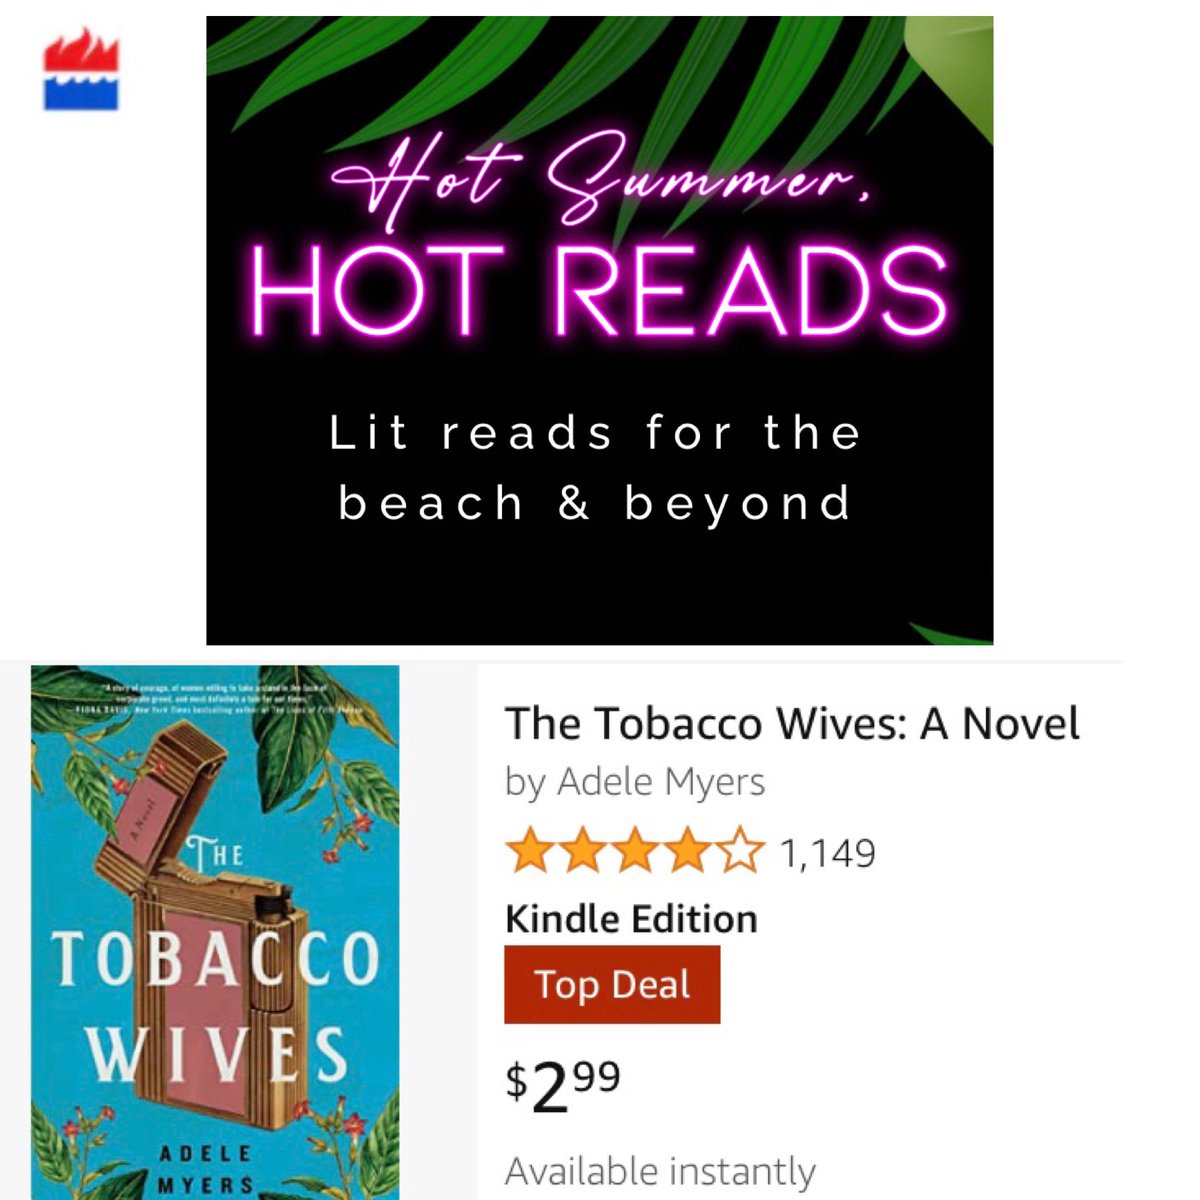 Two days only! 🍃 THE TOBACCO WIVES 🚬 ebook is on sale for $2.99.